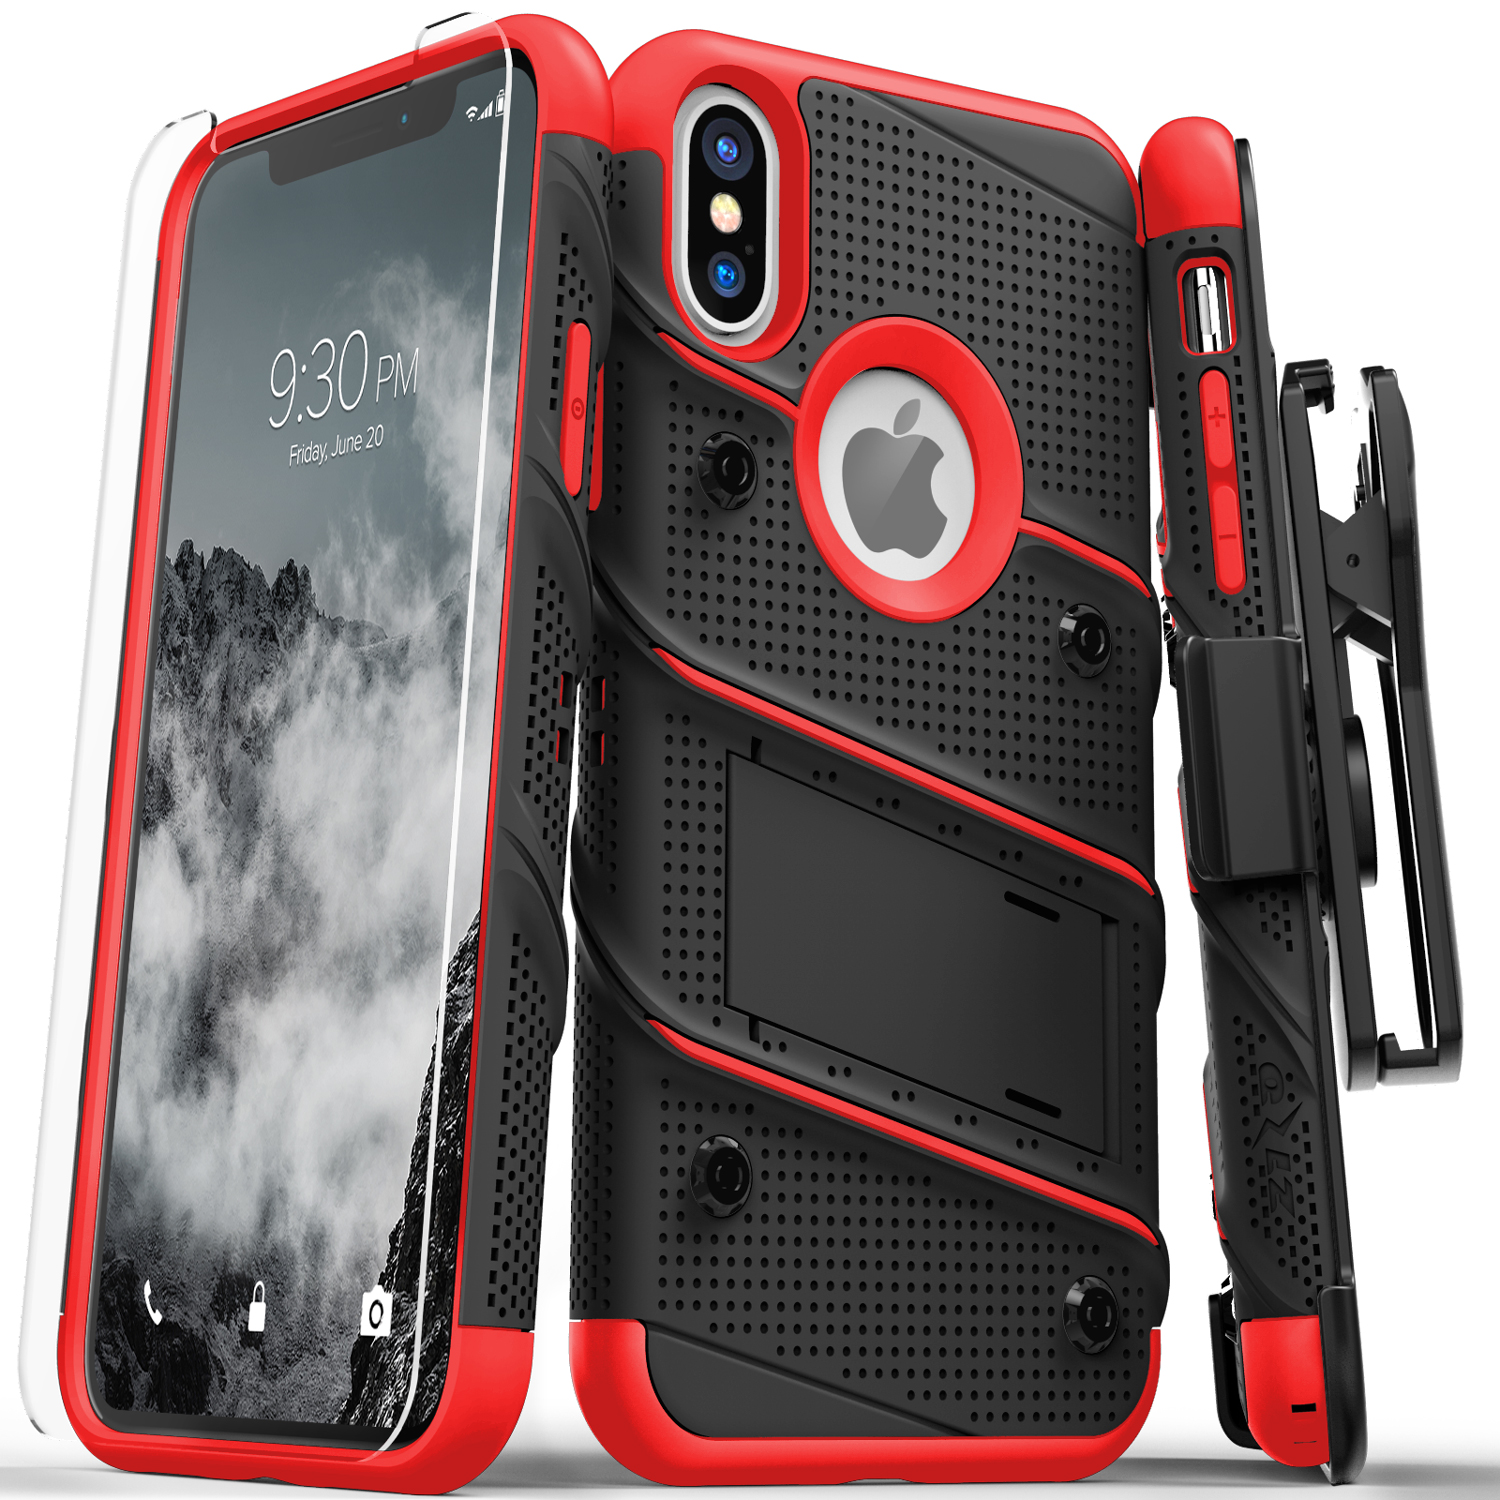 Full Body Military Grade Protection with Carrying Belt Clip | 2-in-1 Screen Protector & Holster Case AlphaCell Cover Compatible with iPhone 7/8 NOT Plus Protective Drop-Proof Shock-Proof